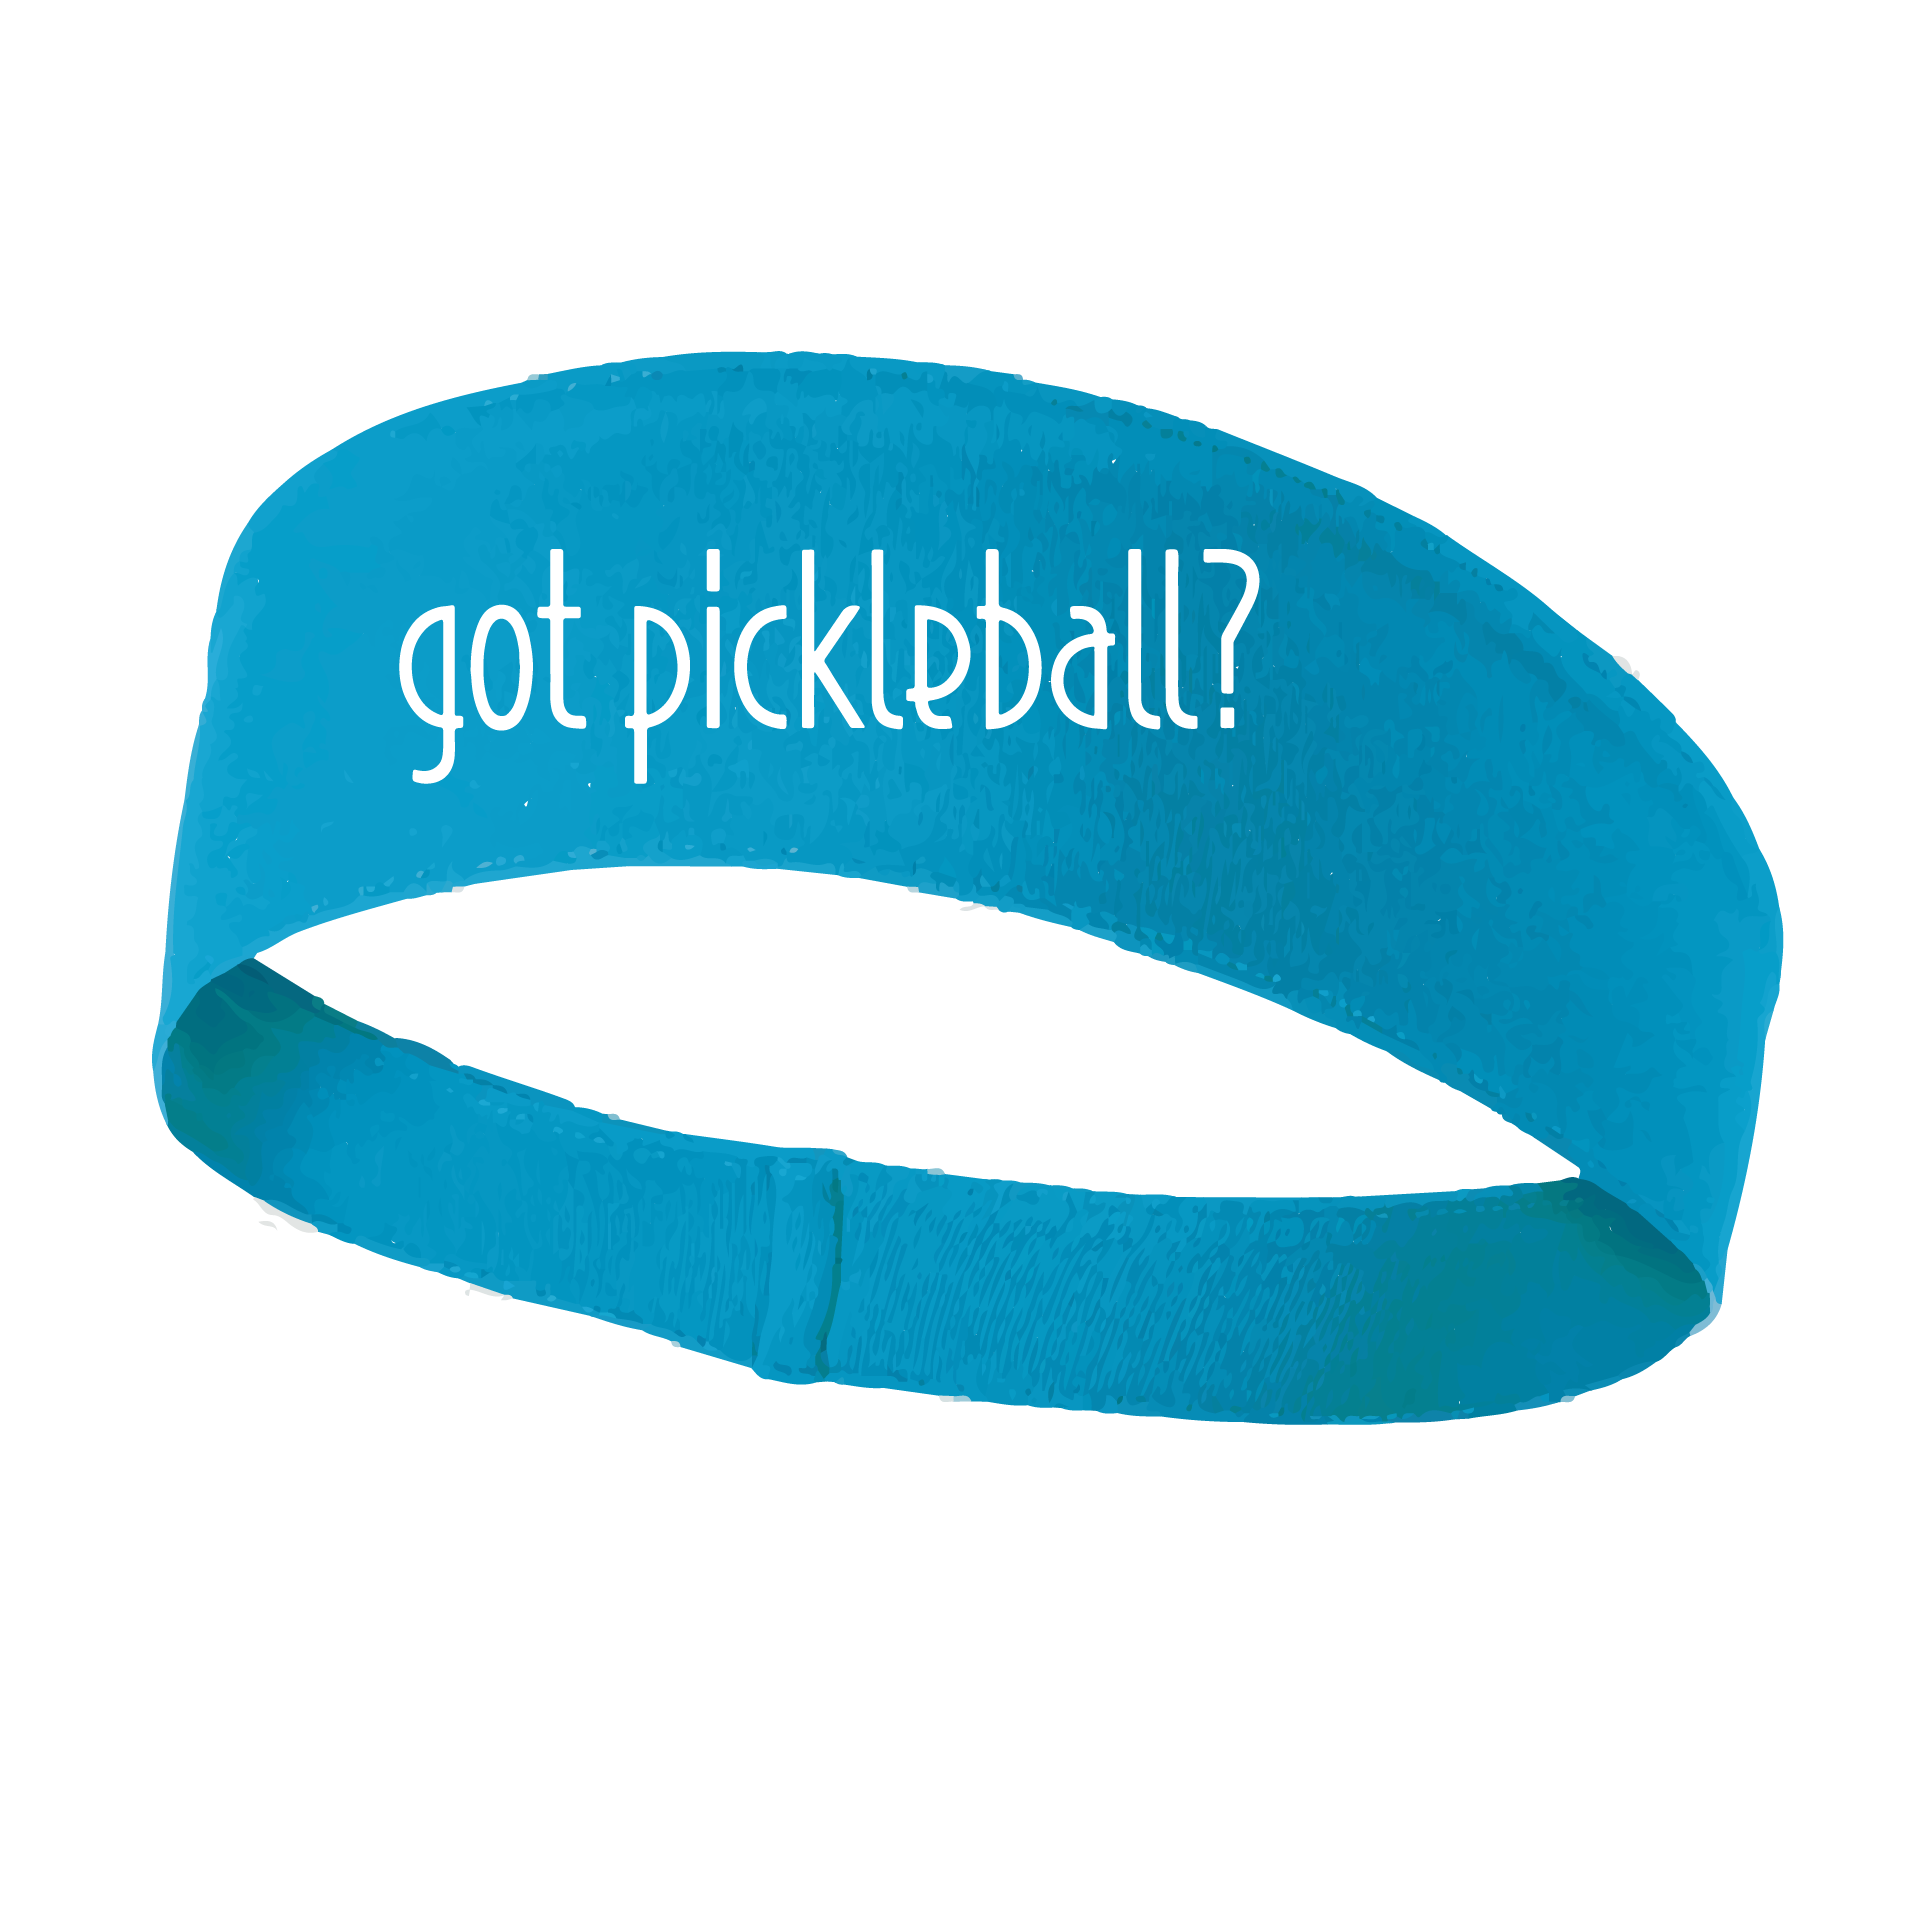 Design: Got Pickleball?  This fun, pickleball designed, moisture-wicking headband narrows in the back to fit more securely. Single-needle top-stitched edging. These headbands come in a variety of colors. Truly shows your love for the sport of pickleball!!